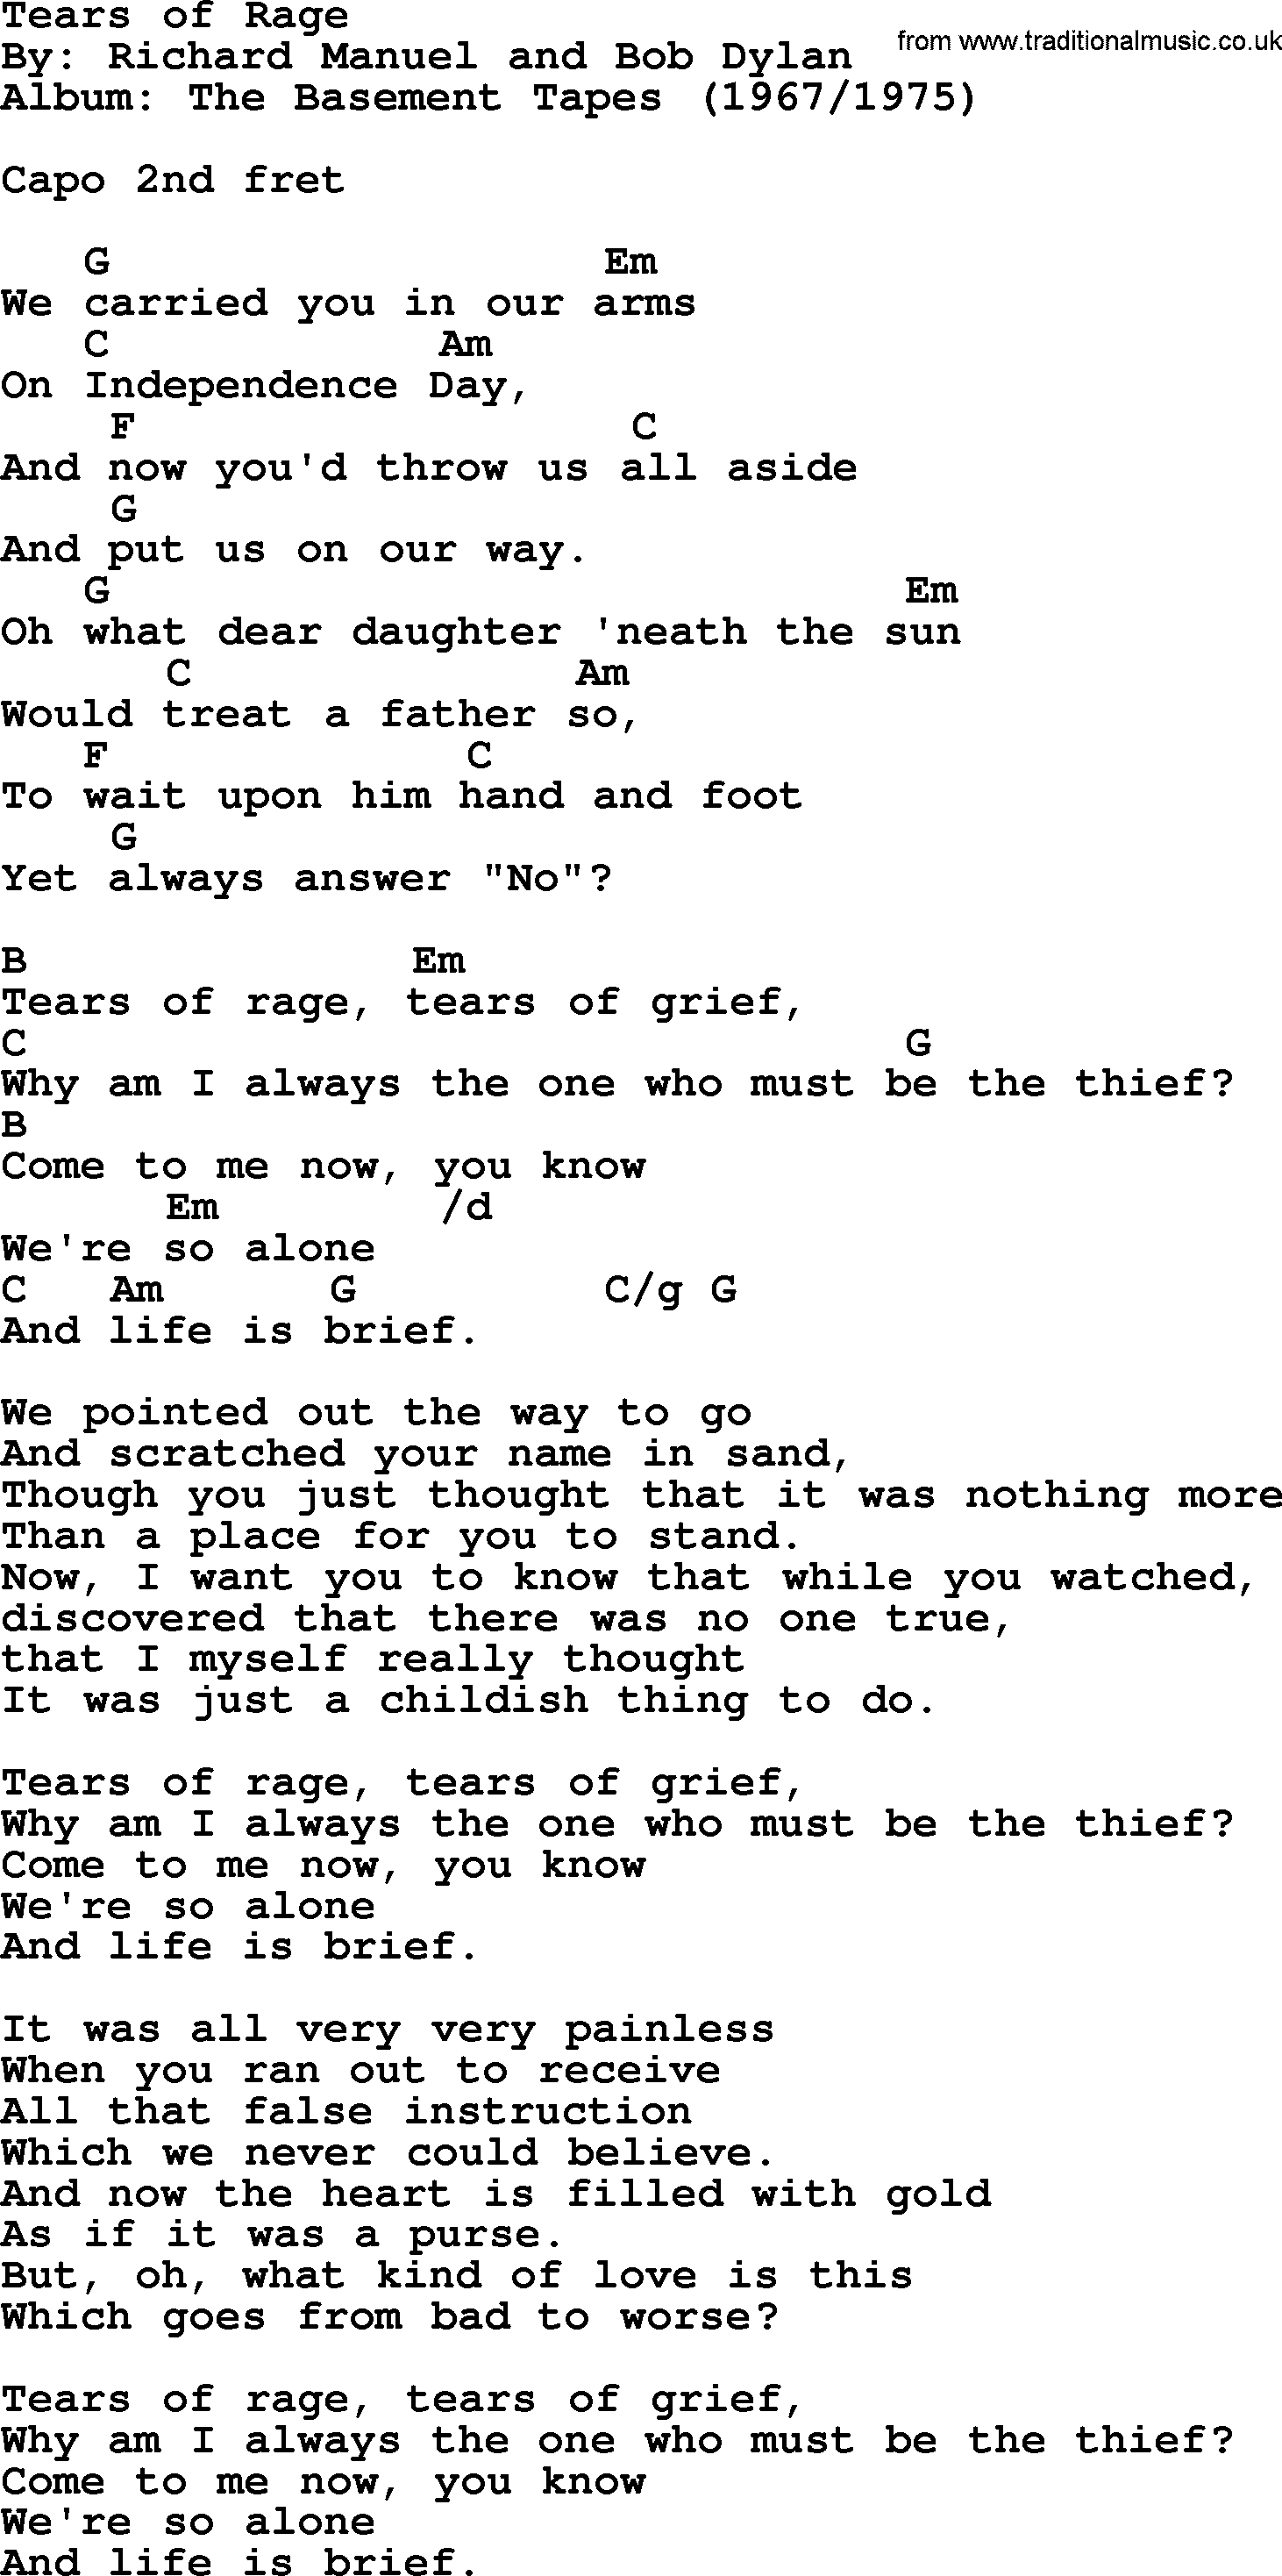 Bob Dylan song, lyrics with chords - Tears of Rage